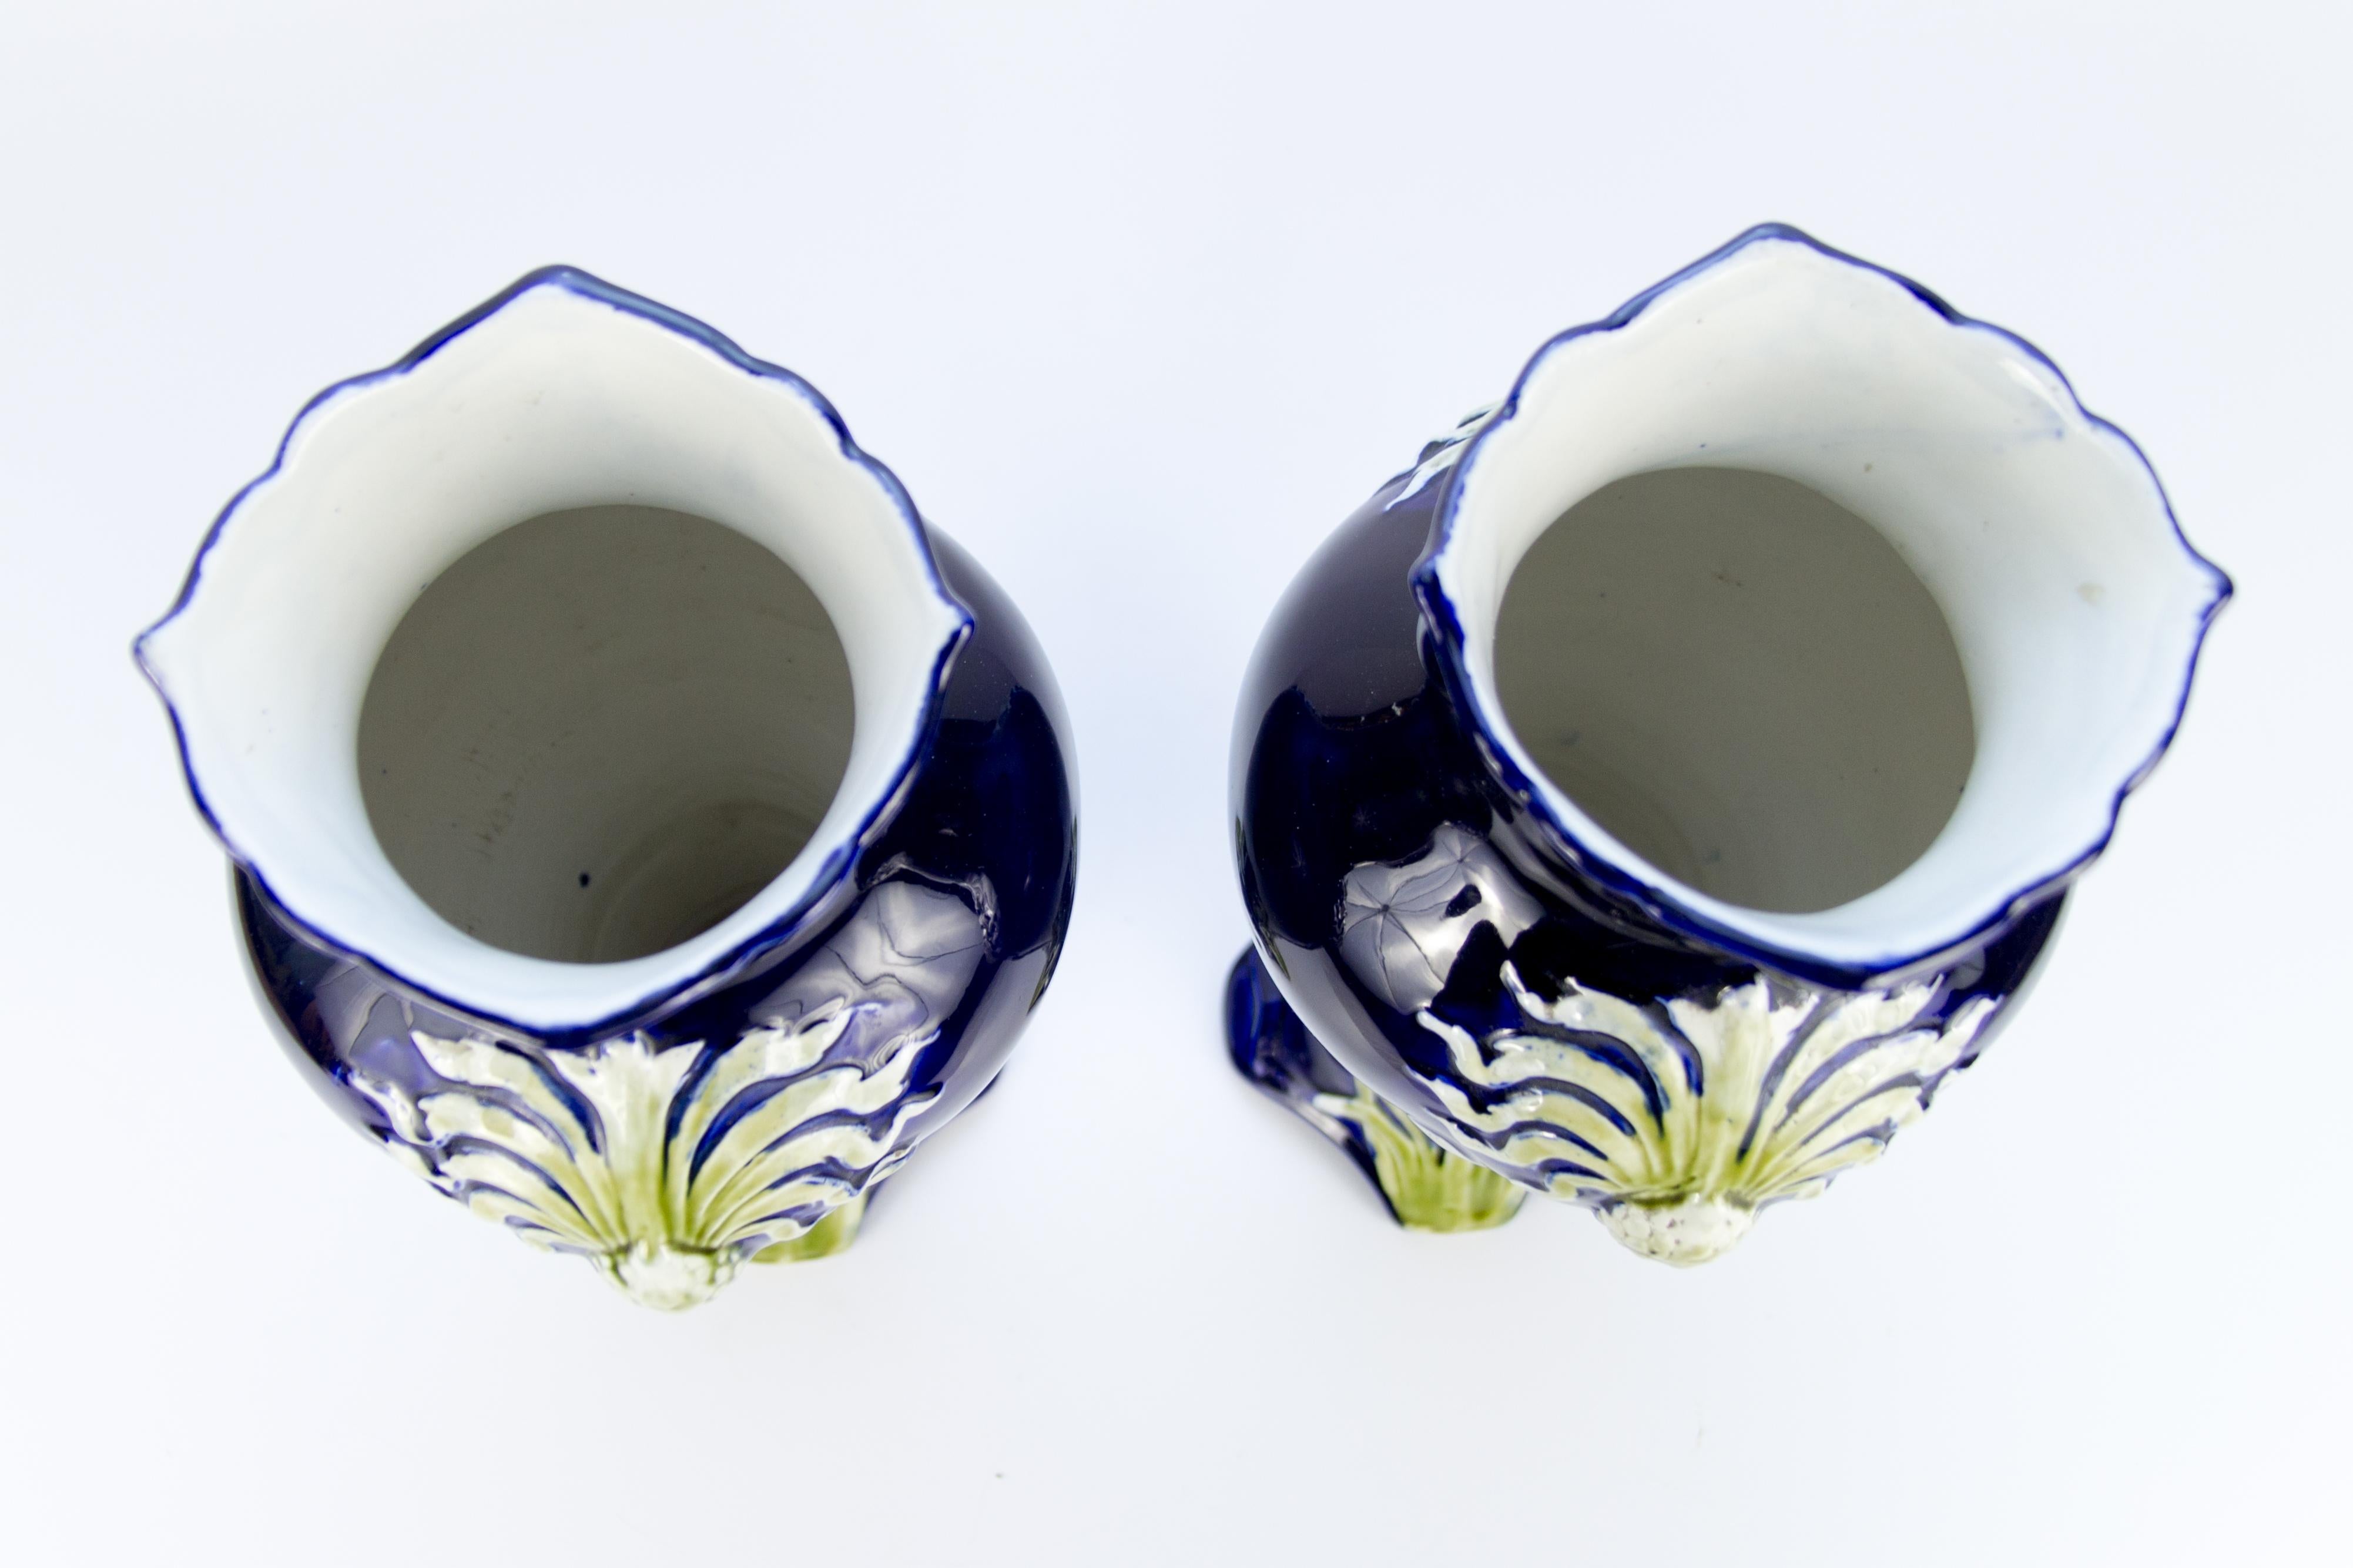 Pair of Early 20th Century French Art Nouveau Vases by J. Bernard De Bruyne 2